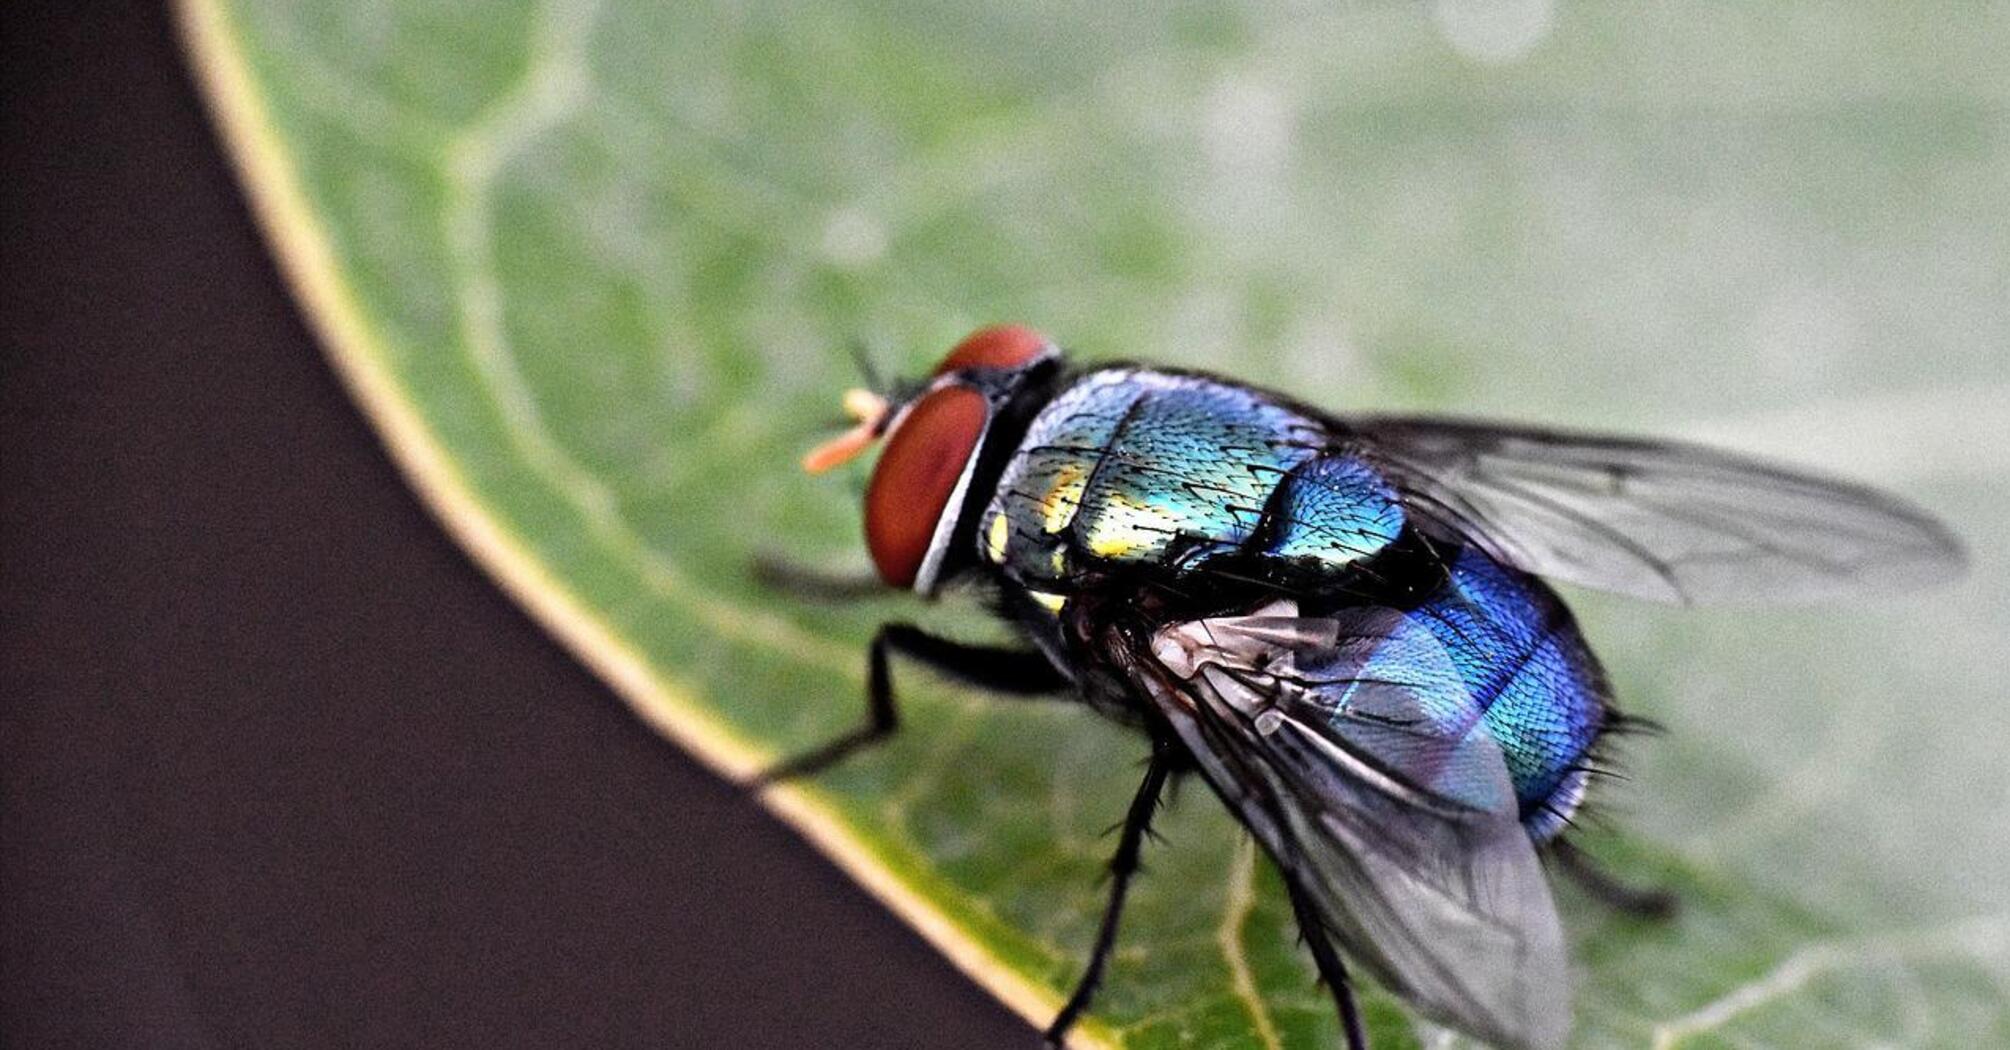 How to get rid of flies in the kitchen in summer